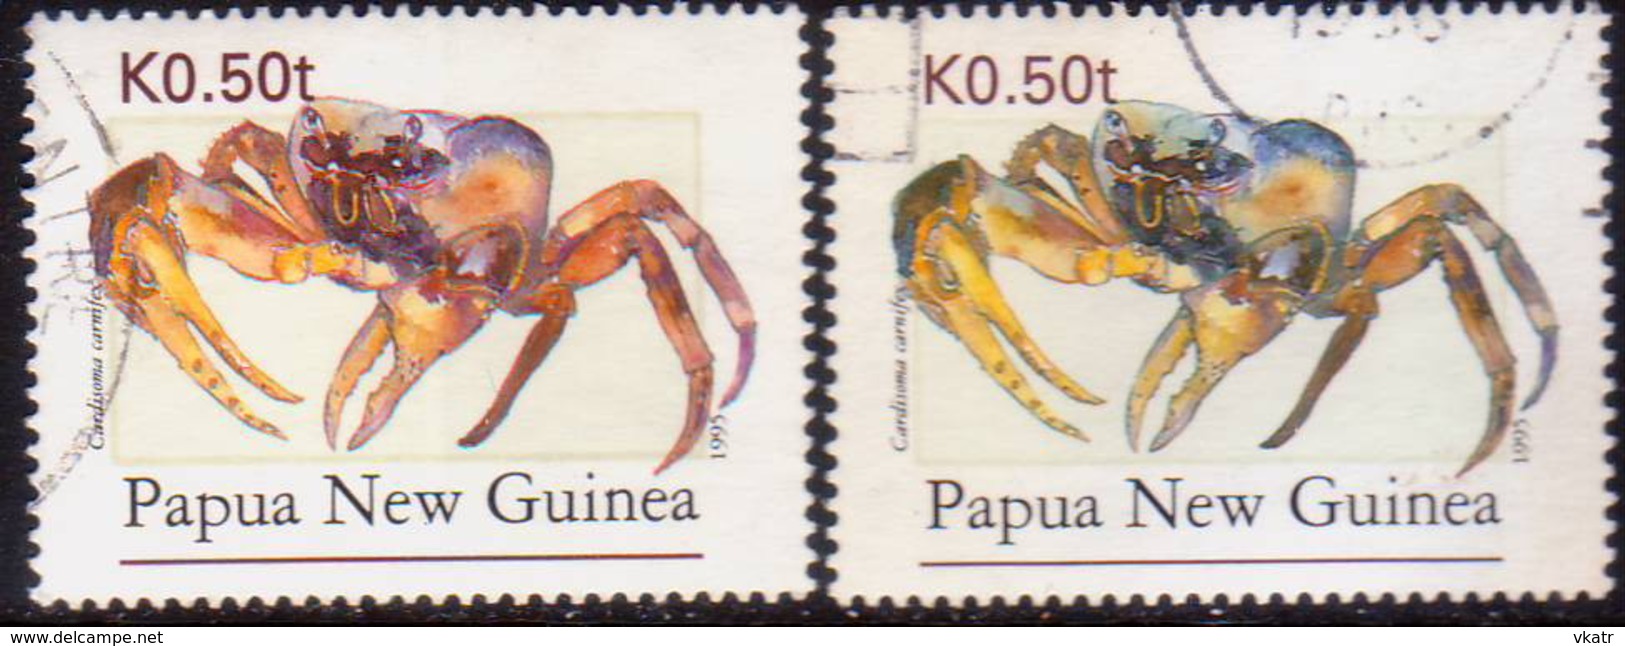 PAPUA NEW GUINEA 1995 SG #773 50t Used Two Shades Crabs - Papua New Guinea